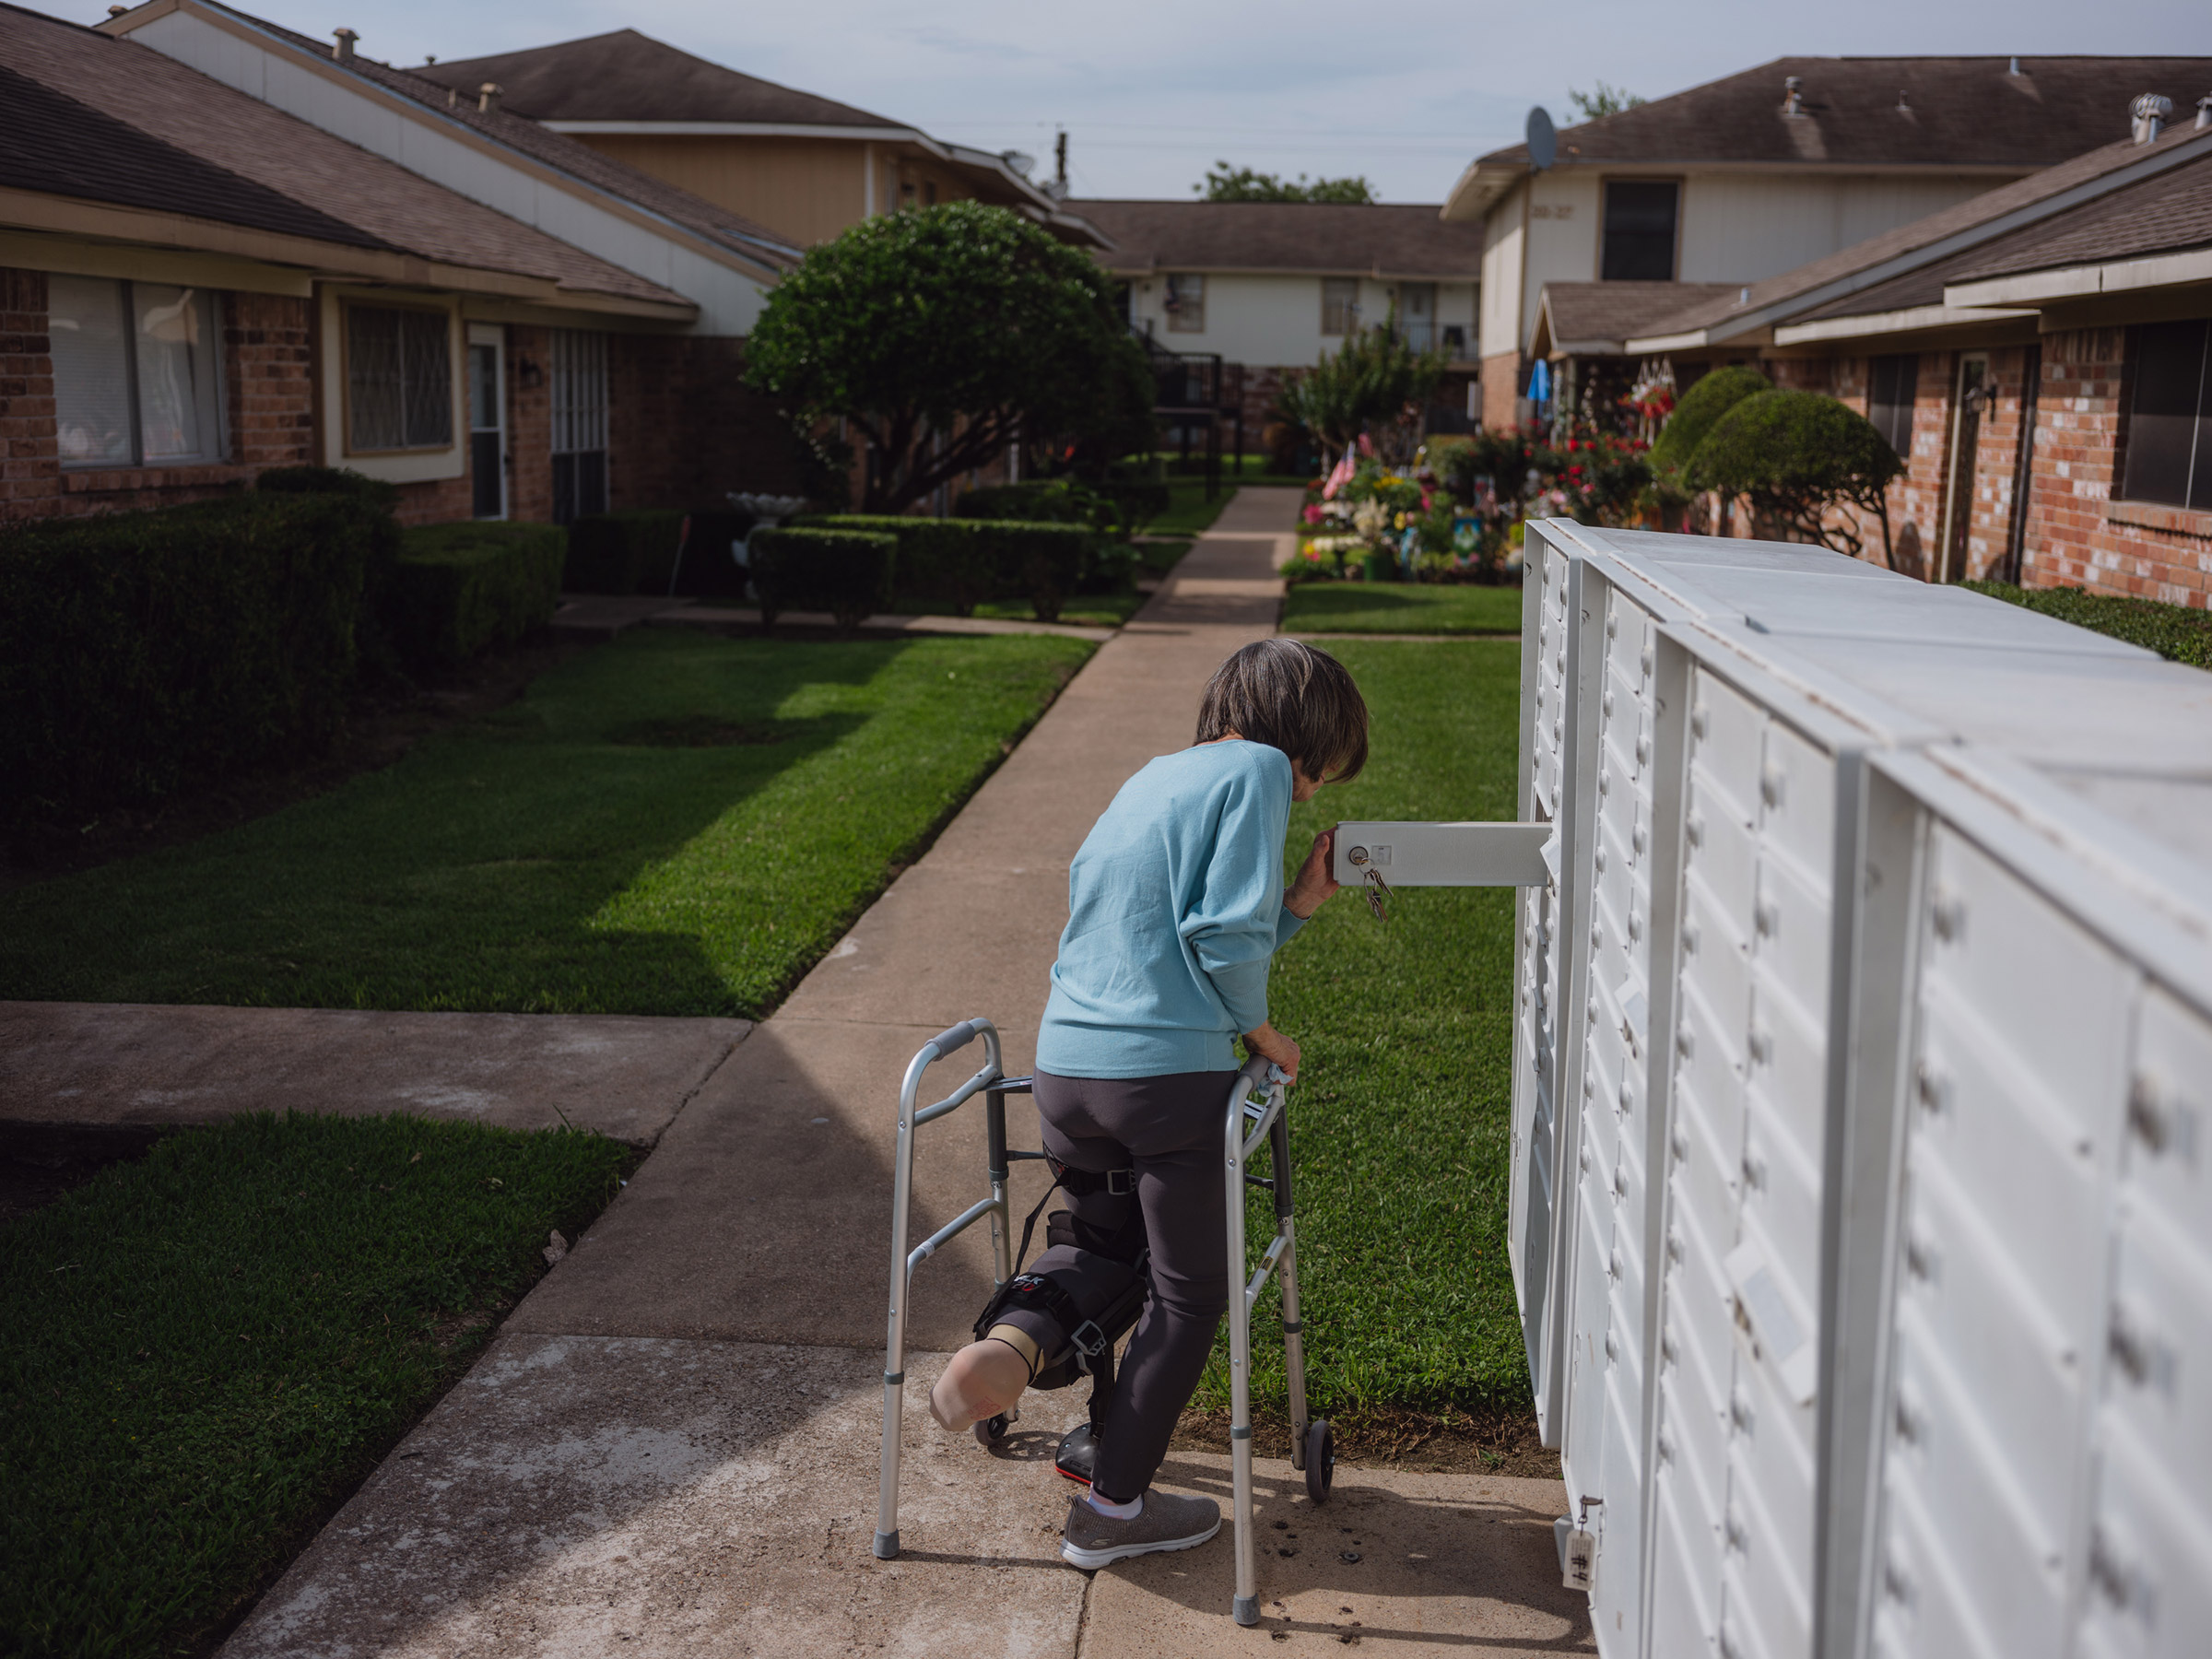 Pasadena, Texas - June 1, 2021:Nancy Thompson, 72, was seen walking to check her mail from her home in Pasadena, Texas on June 1, 2021. Thompson, an elderly person recovering from a surgical procedure and a victim of repeated falls, received assistance from CAPABLE where they retrofitted her home and provided tools to help her live more independently. Photo: Christopher Lee for TIME